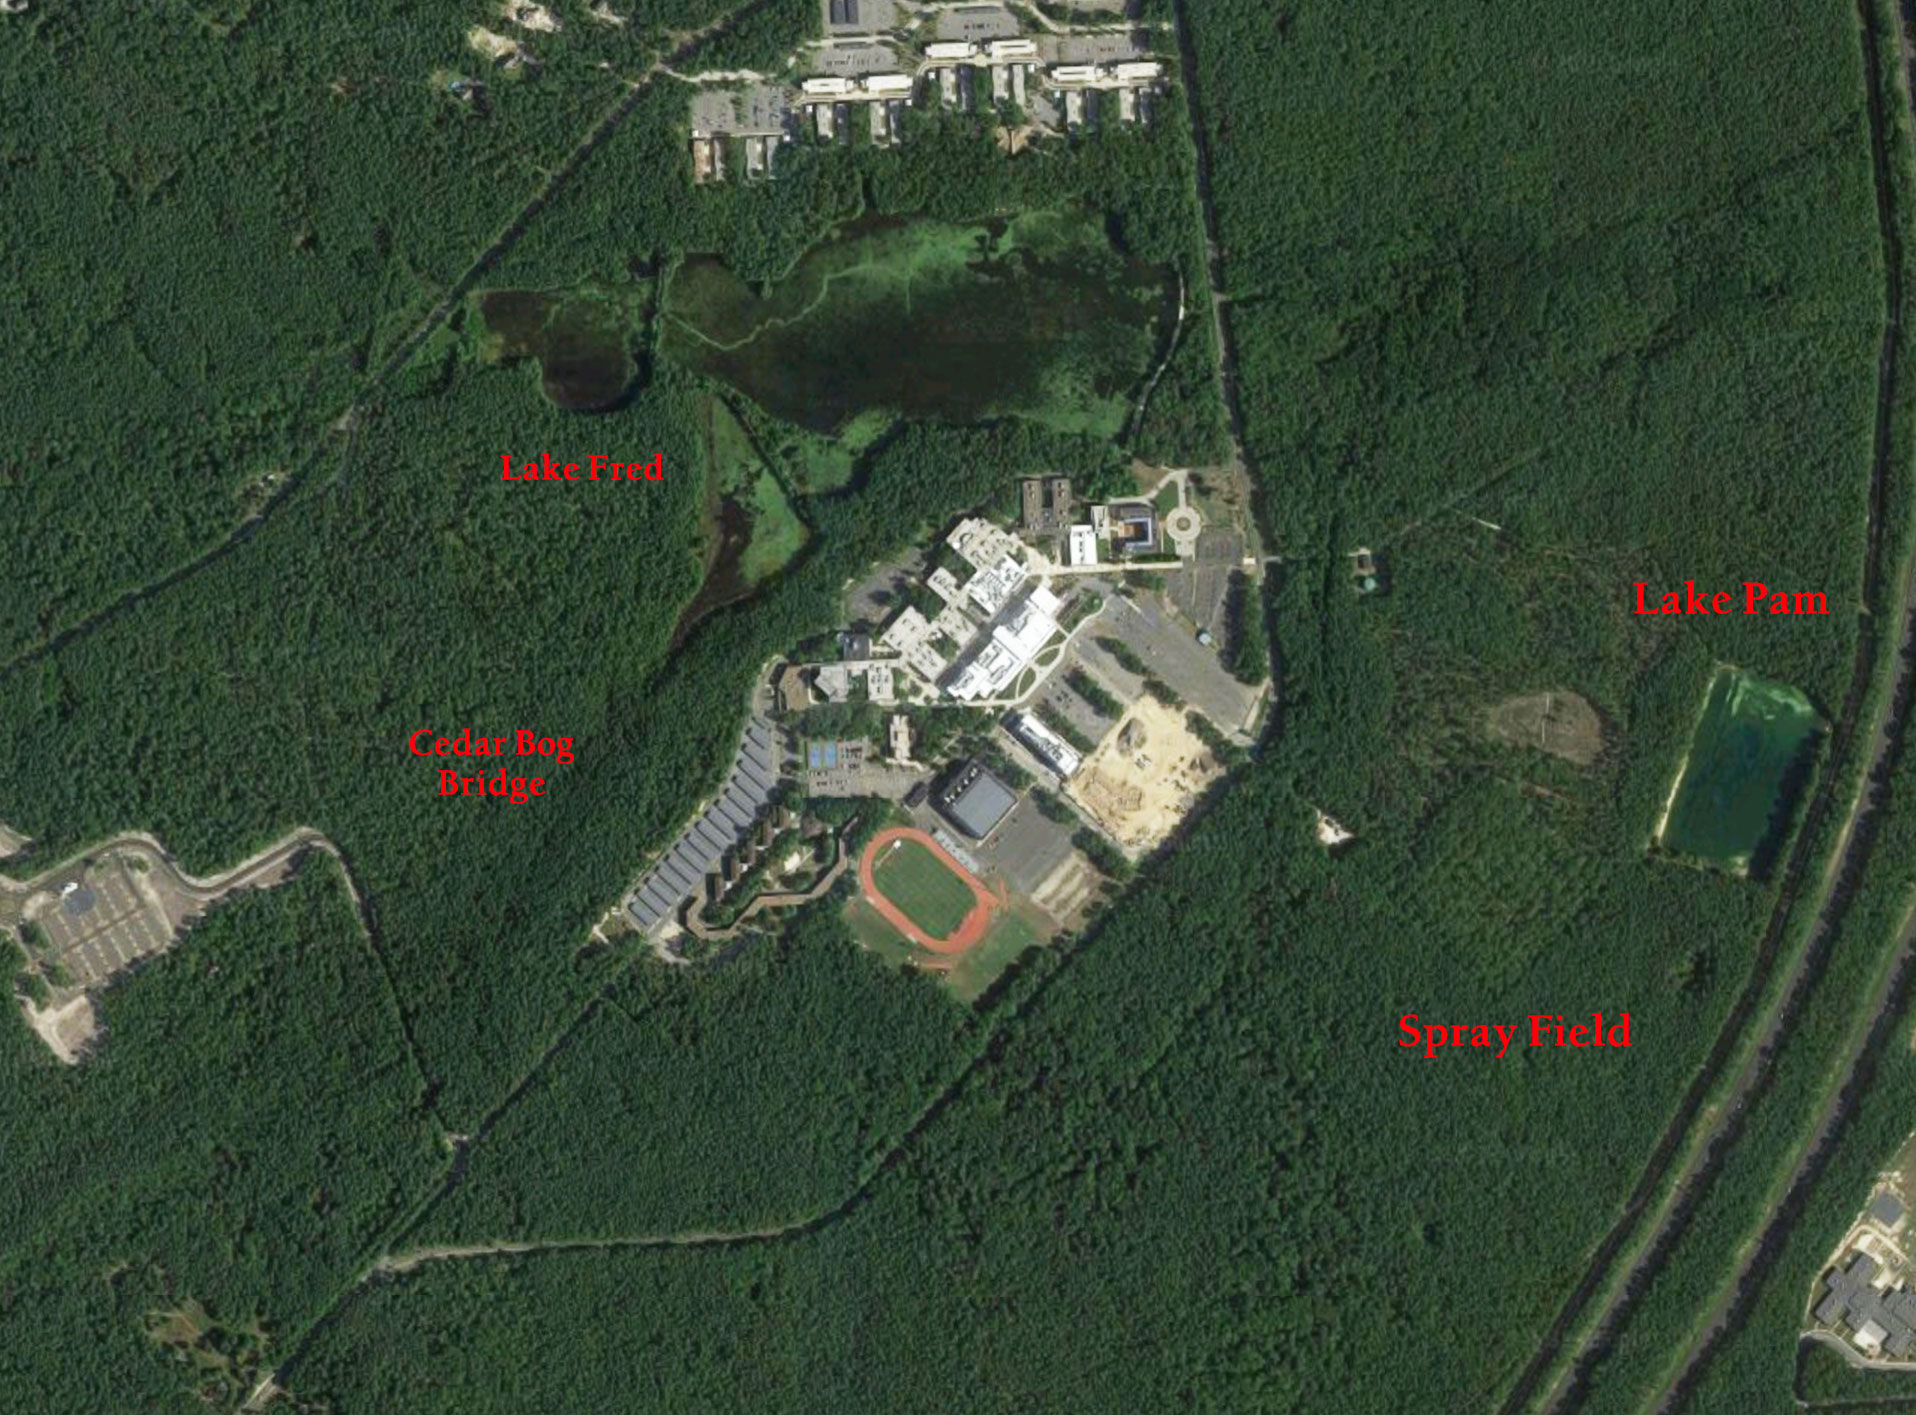 Figure 1. A recent satellite photograph of the Stockton Campus. Lake Pam, with the Spray Field adjacent (see the grid pattern that remains in the forest), are to the east (right), near the Garden State Parkway.